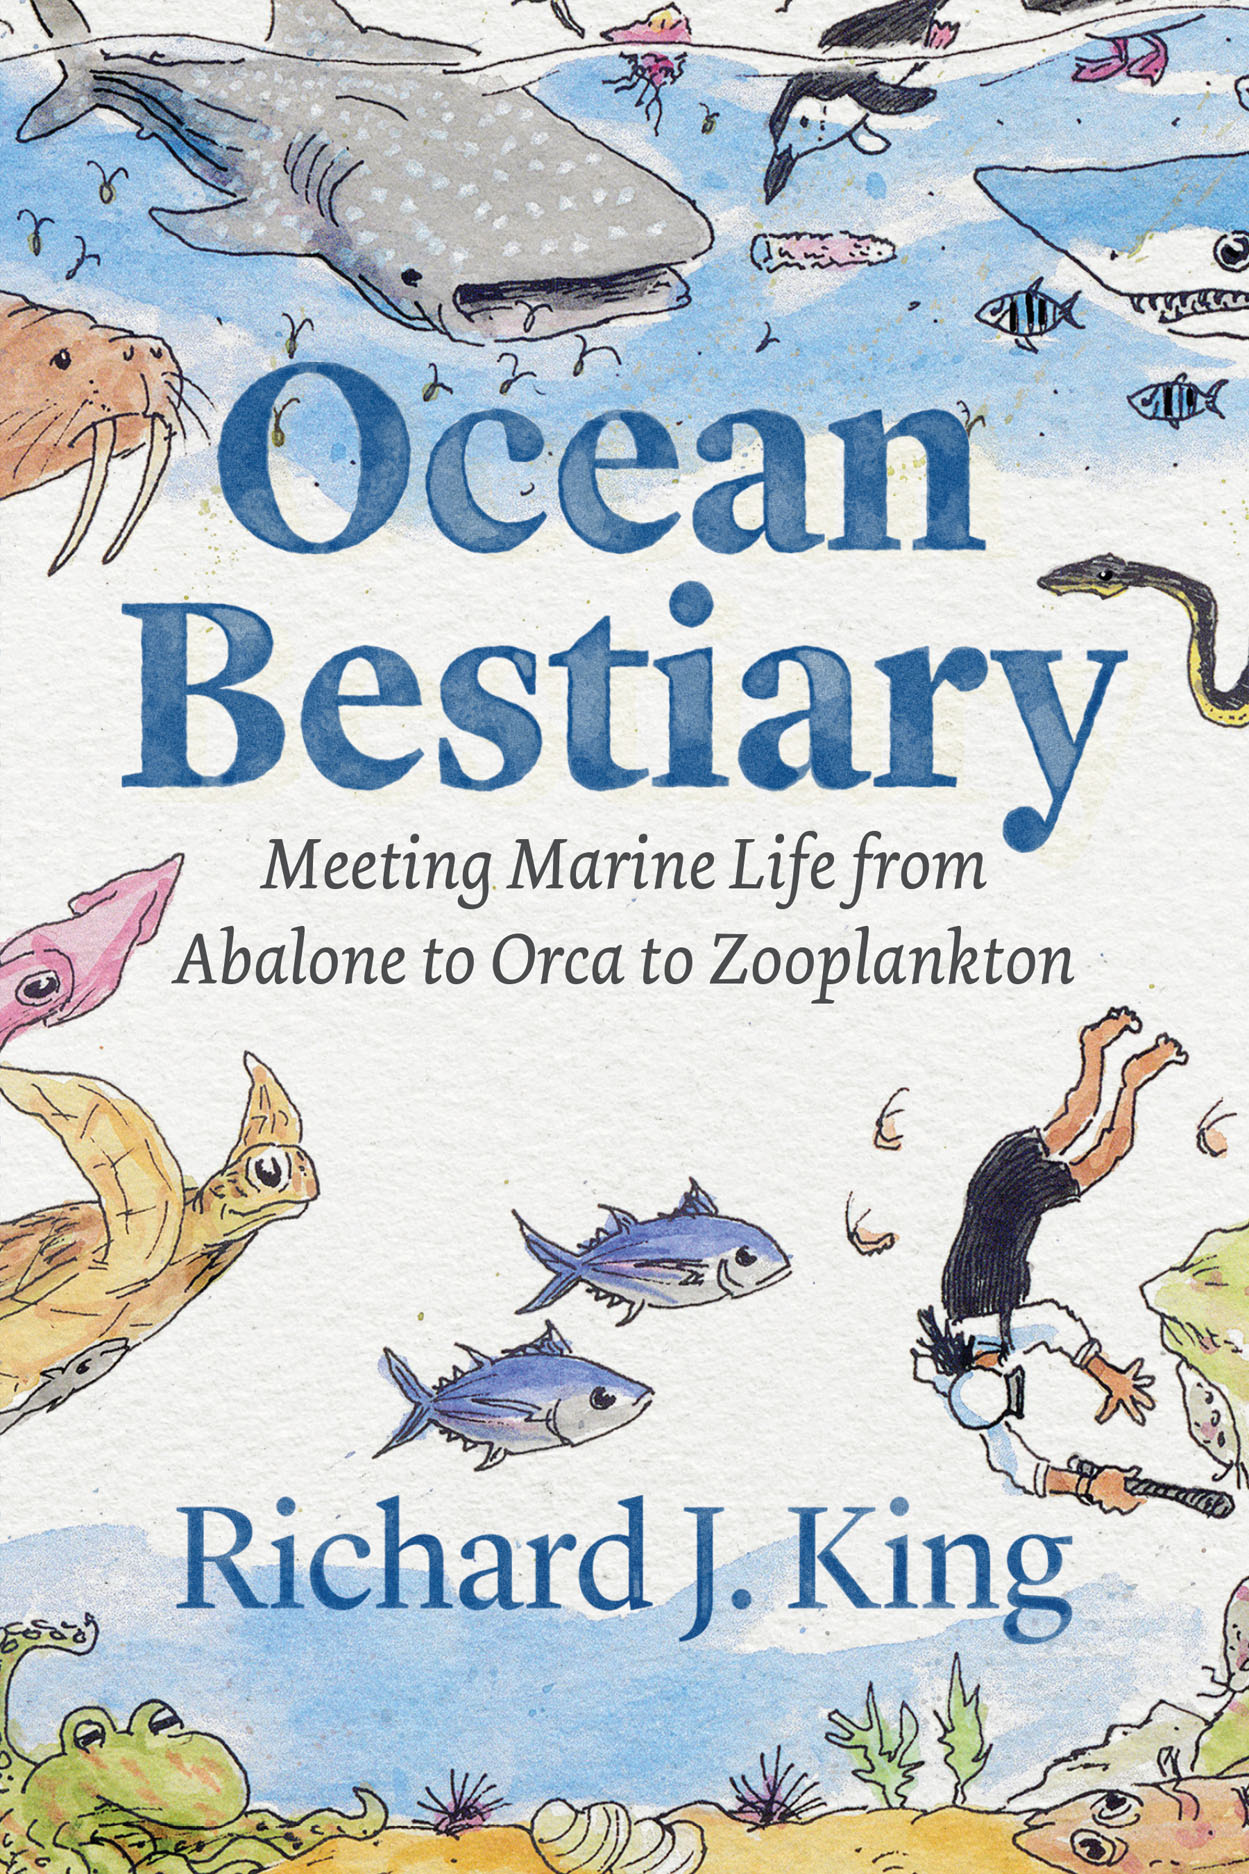 Ocean Bestiary: Meeting Marine Life from Abalone to Orca to Zooplankton,  King